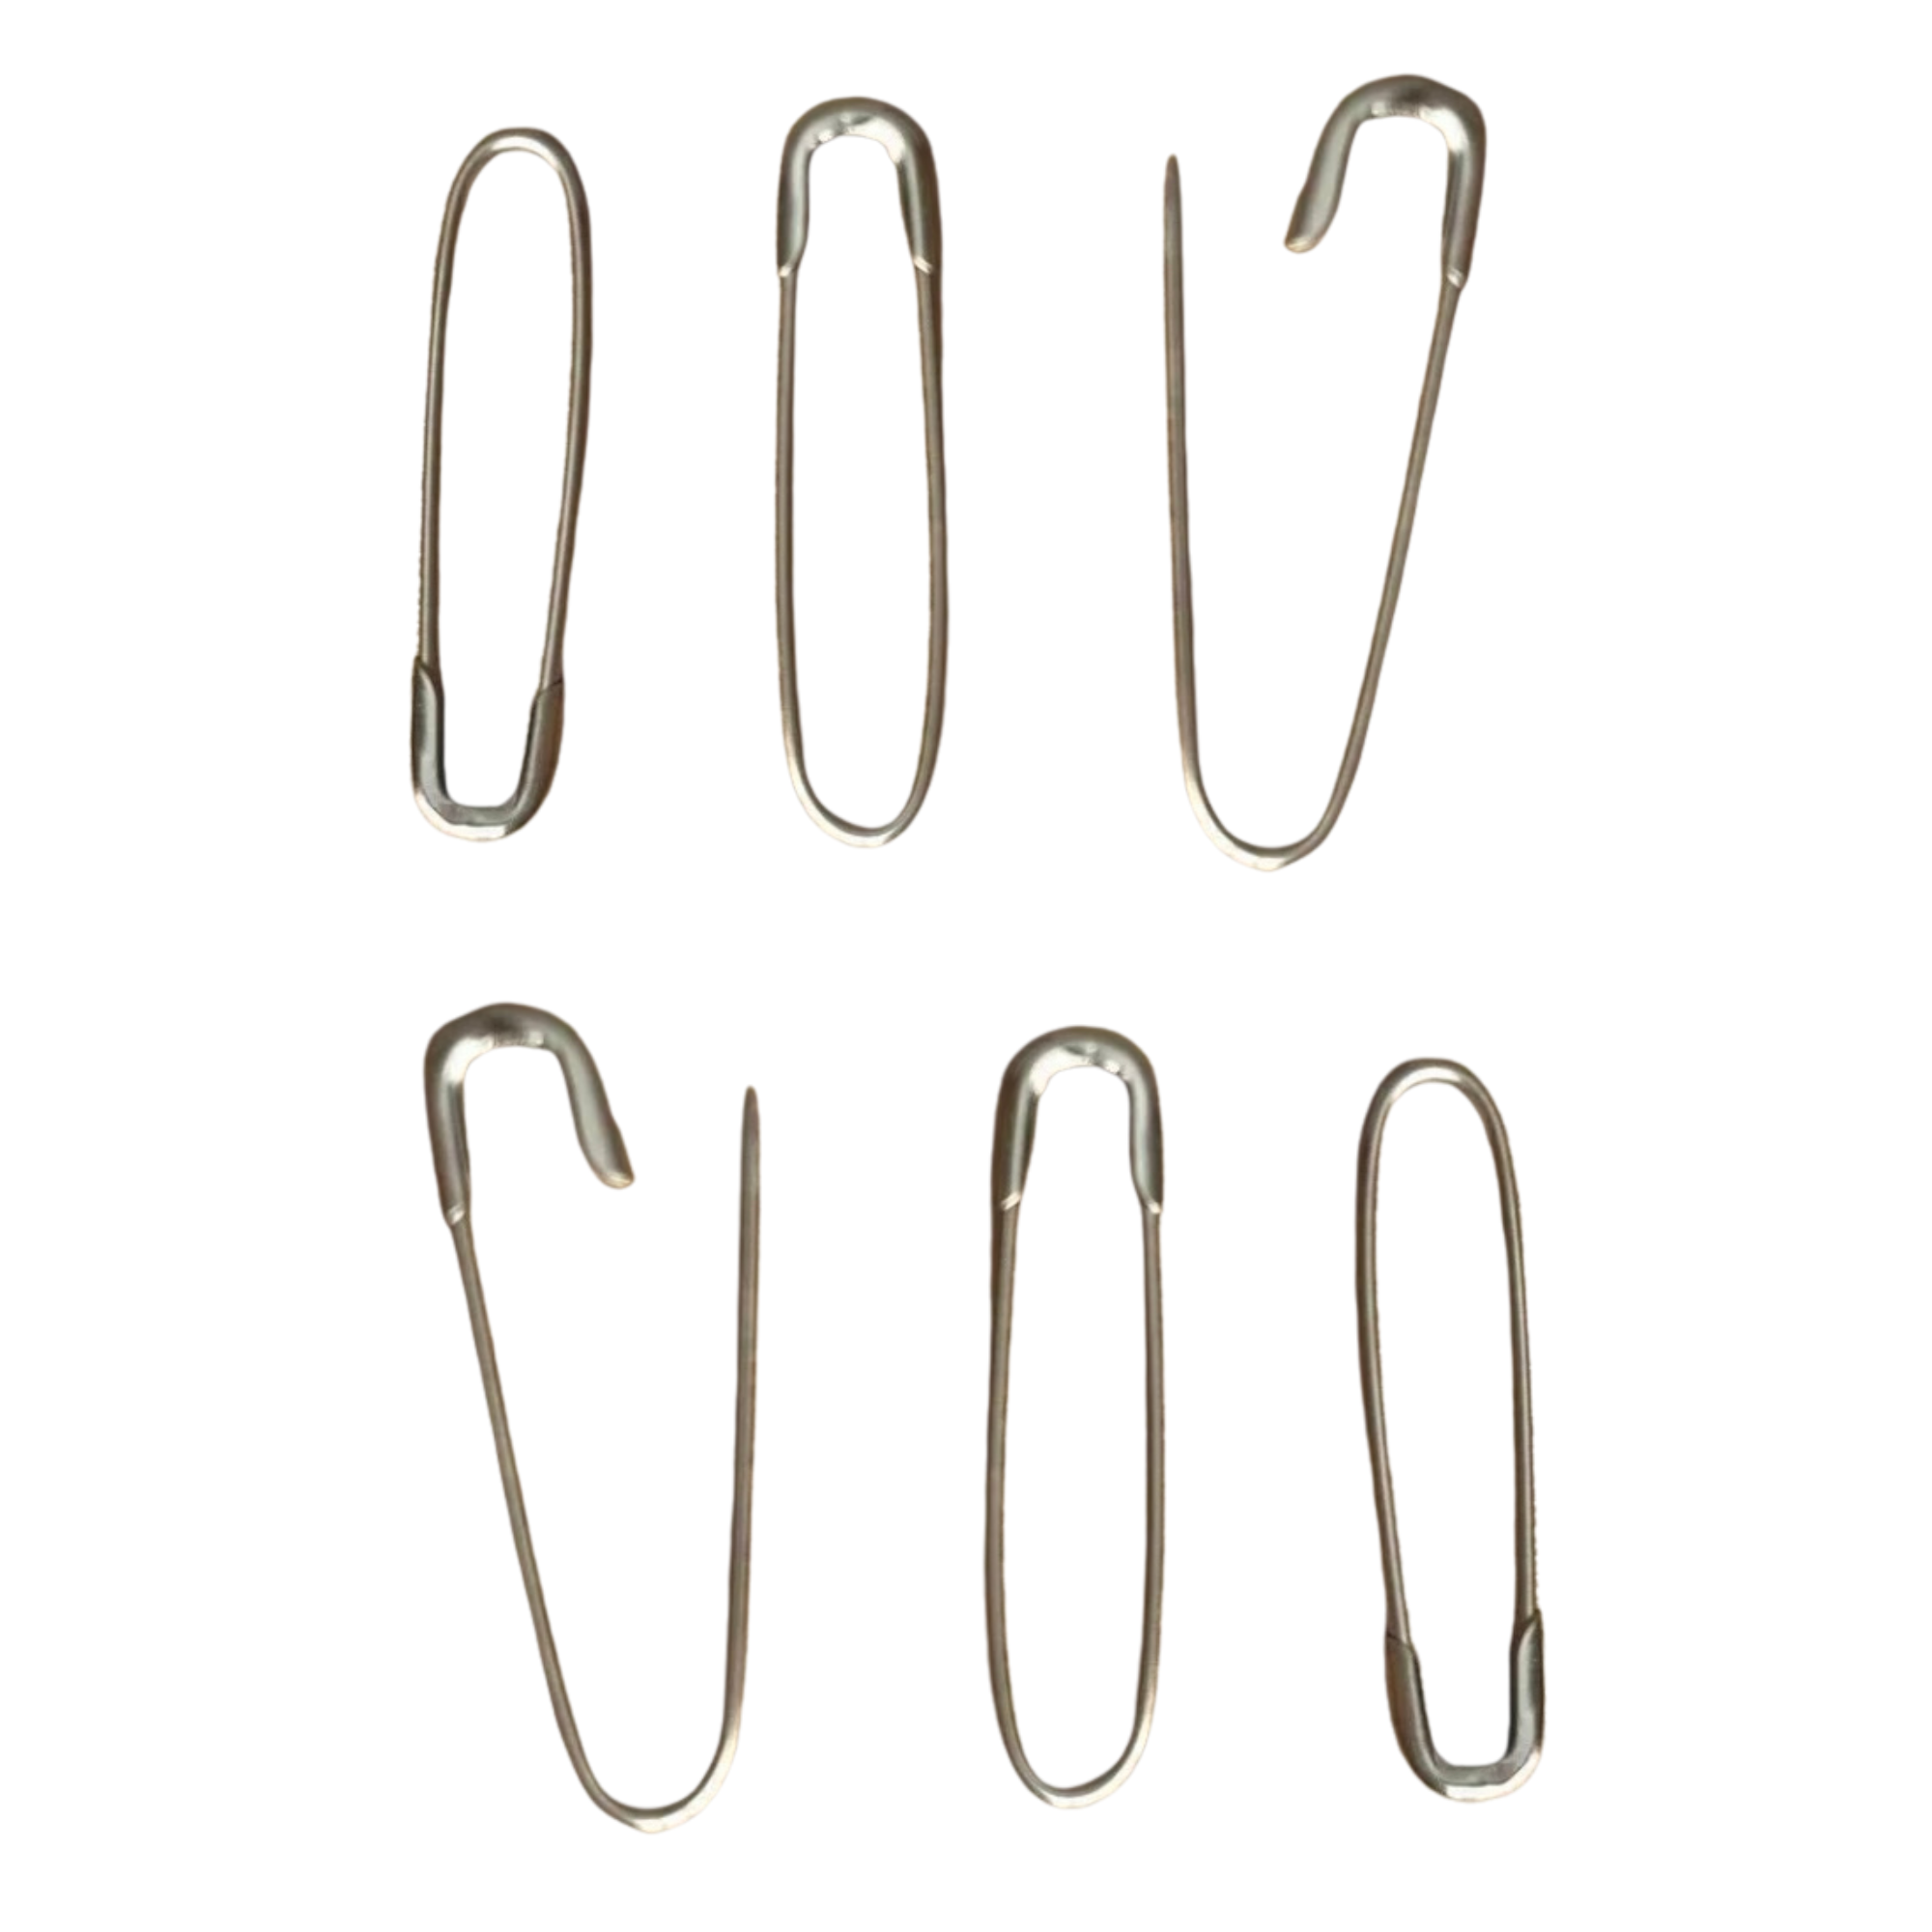 NO SEW Brooch Pins - Pack of 6